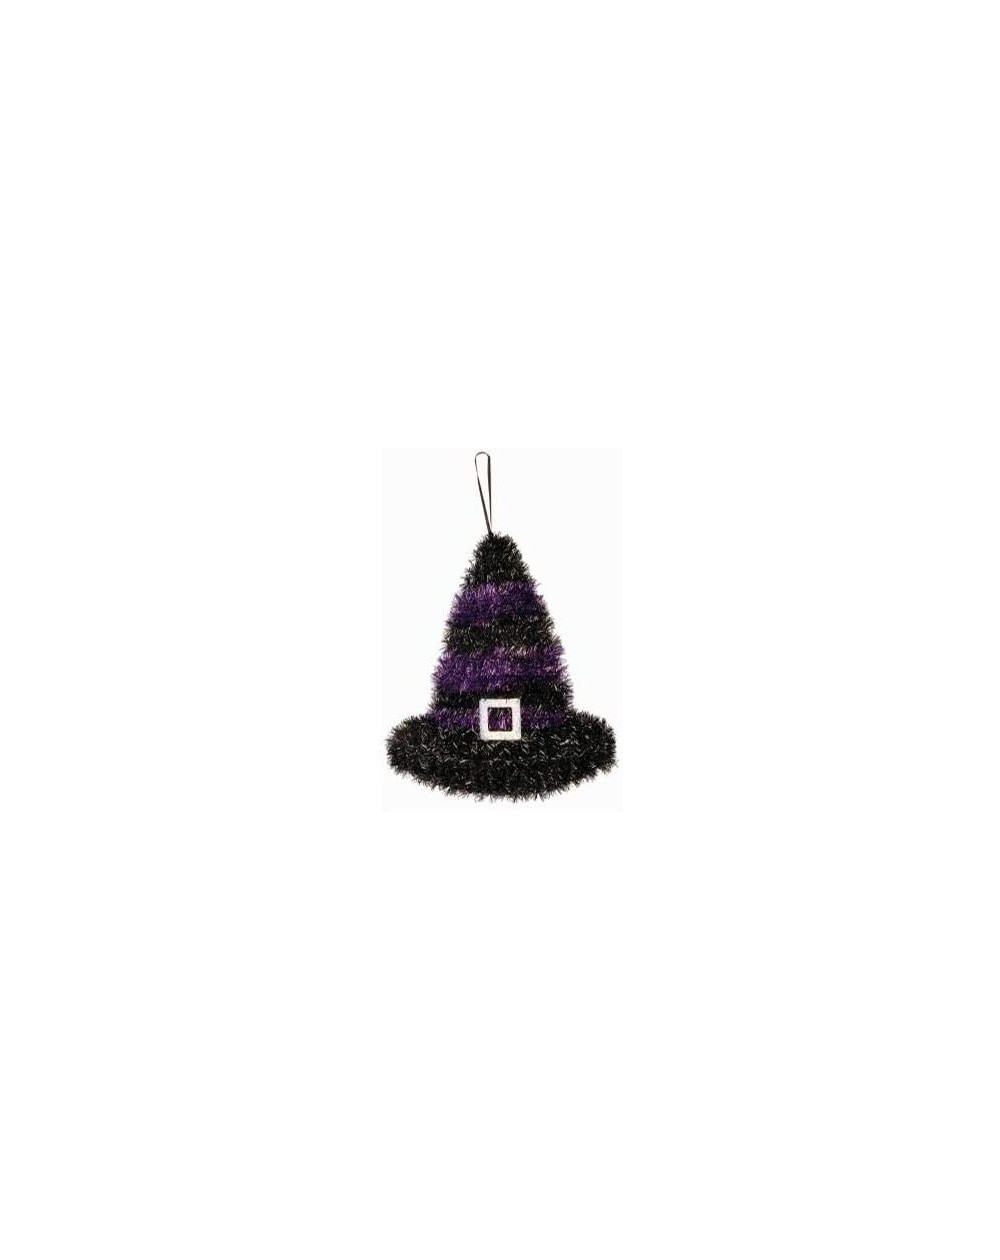 Tinsel Halloween Tinsel Witch Hat Hanging Decoration - 2 Pieces - CF19GM2L4X6 $25.44